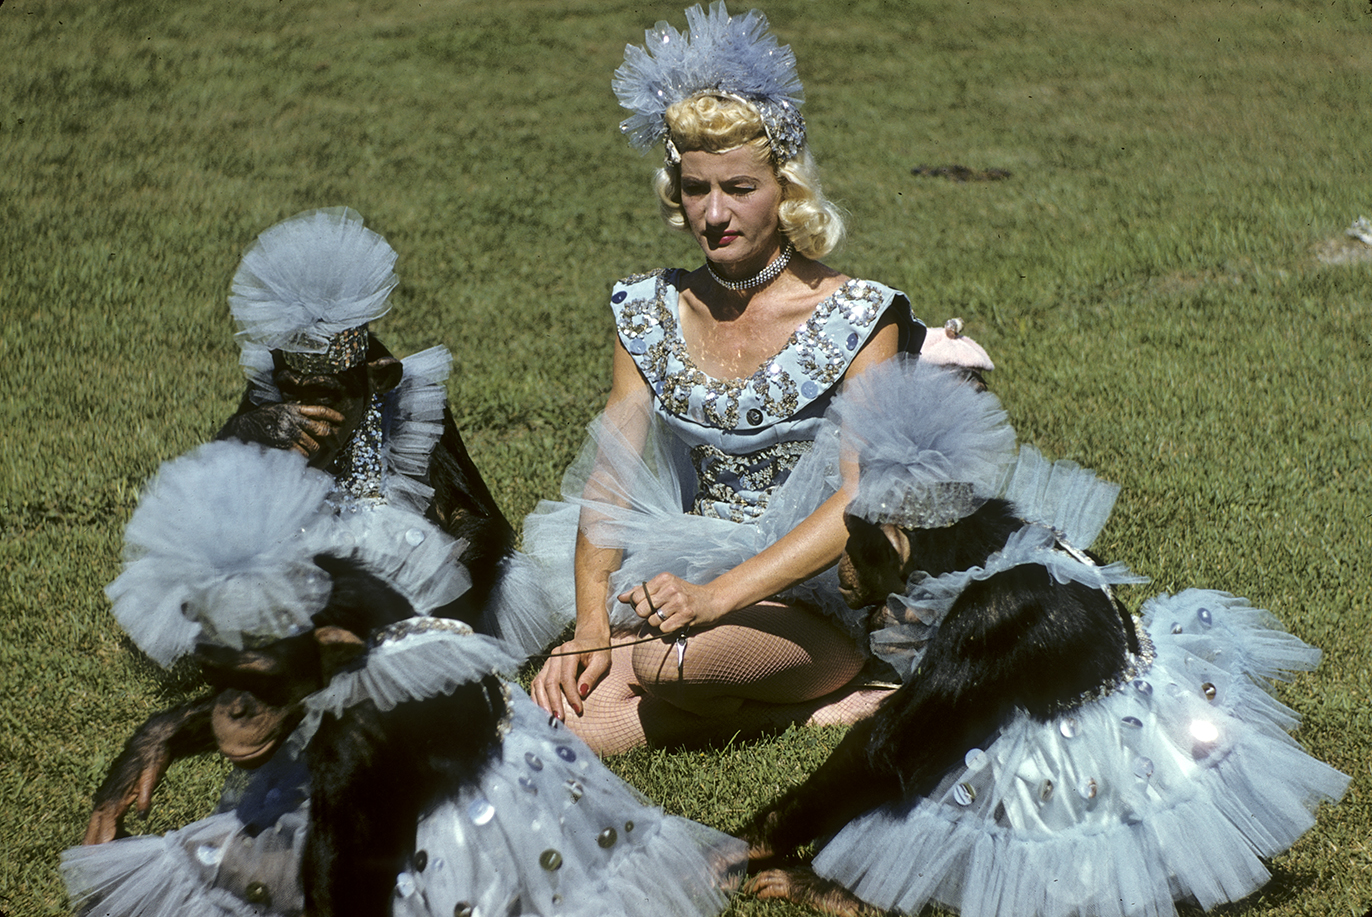 Woman and chimpanzees are sitting on grass, all are wearing light blue and silver outfits with tutus and headpieces.